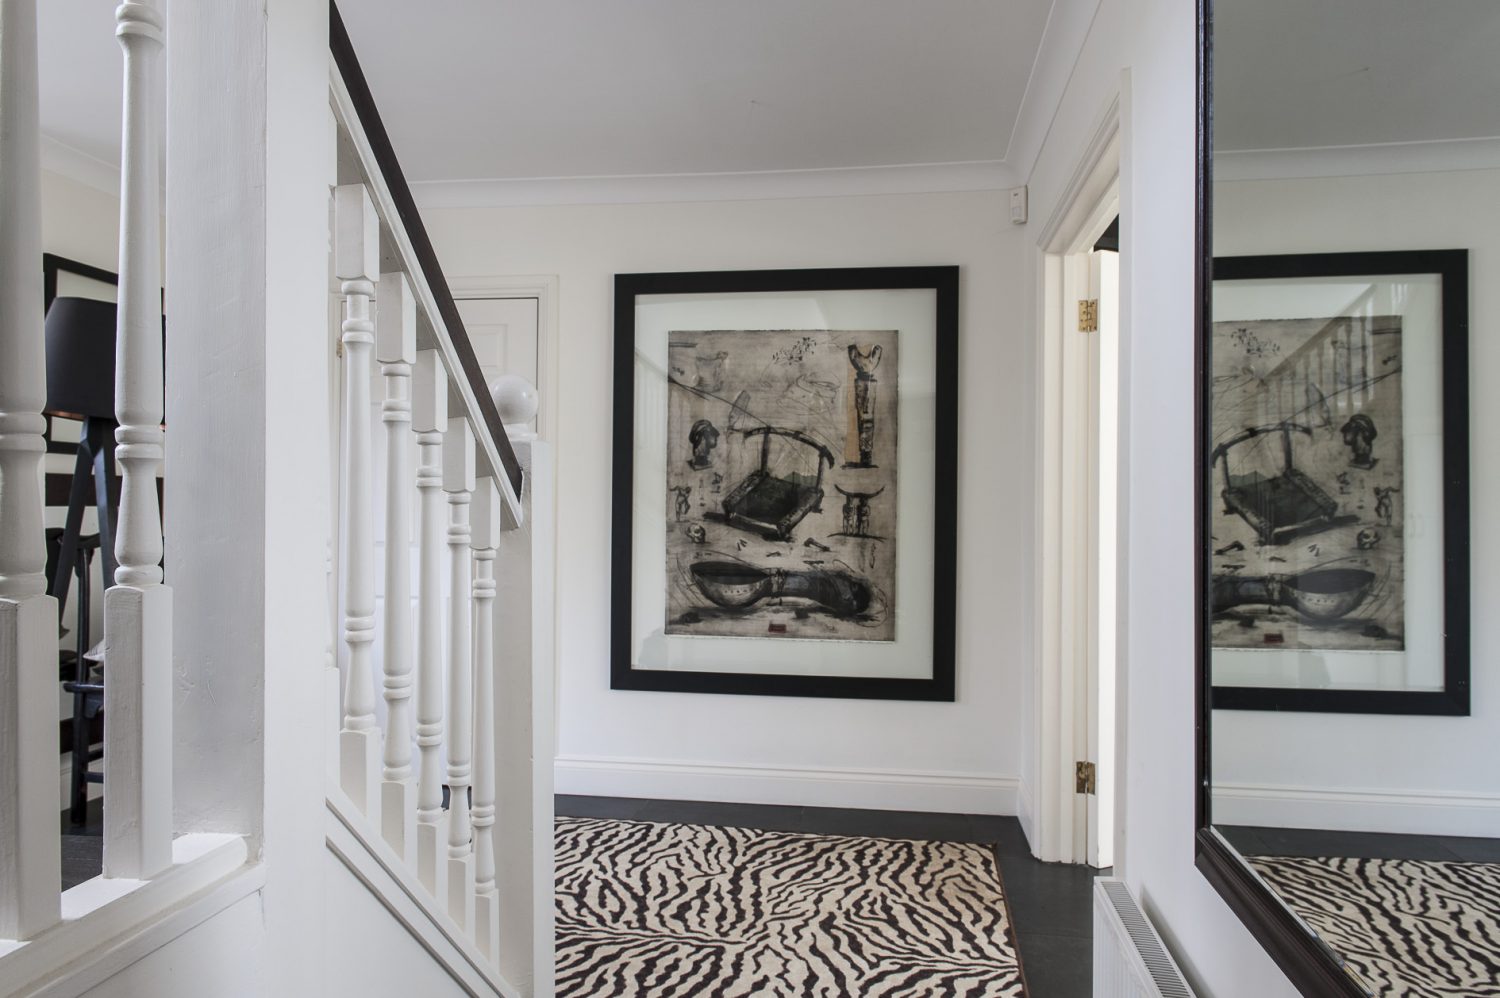 In the hallway sprawls a zebra print rug and on the wall a mixed media work by another RSA artist Debra Bell. In the children’s room sofas – one stone, the other black – lounge around a huge TV. On the wall opposite is a pair of antlers and a great wildlife print by one of the couple’s favourite artists, South African John Moore...